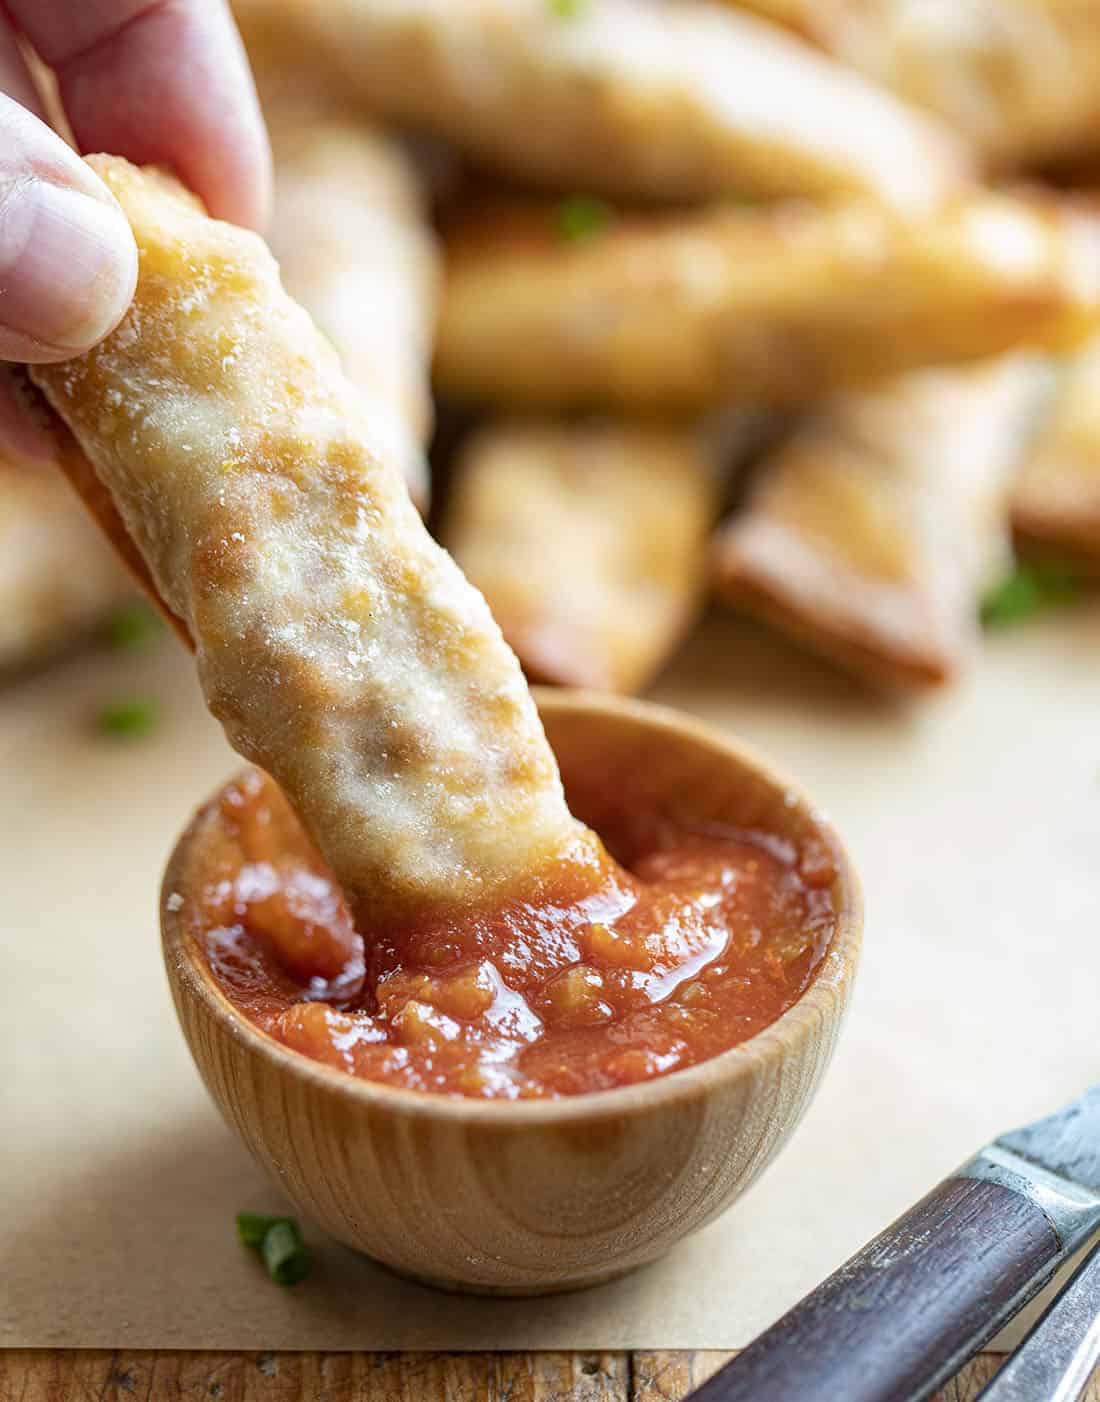 Dipping Breakfast Taquitos into Salsa